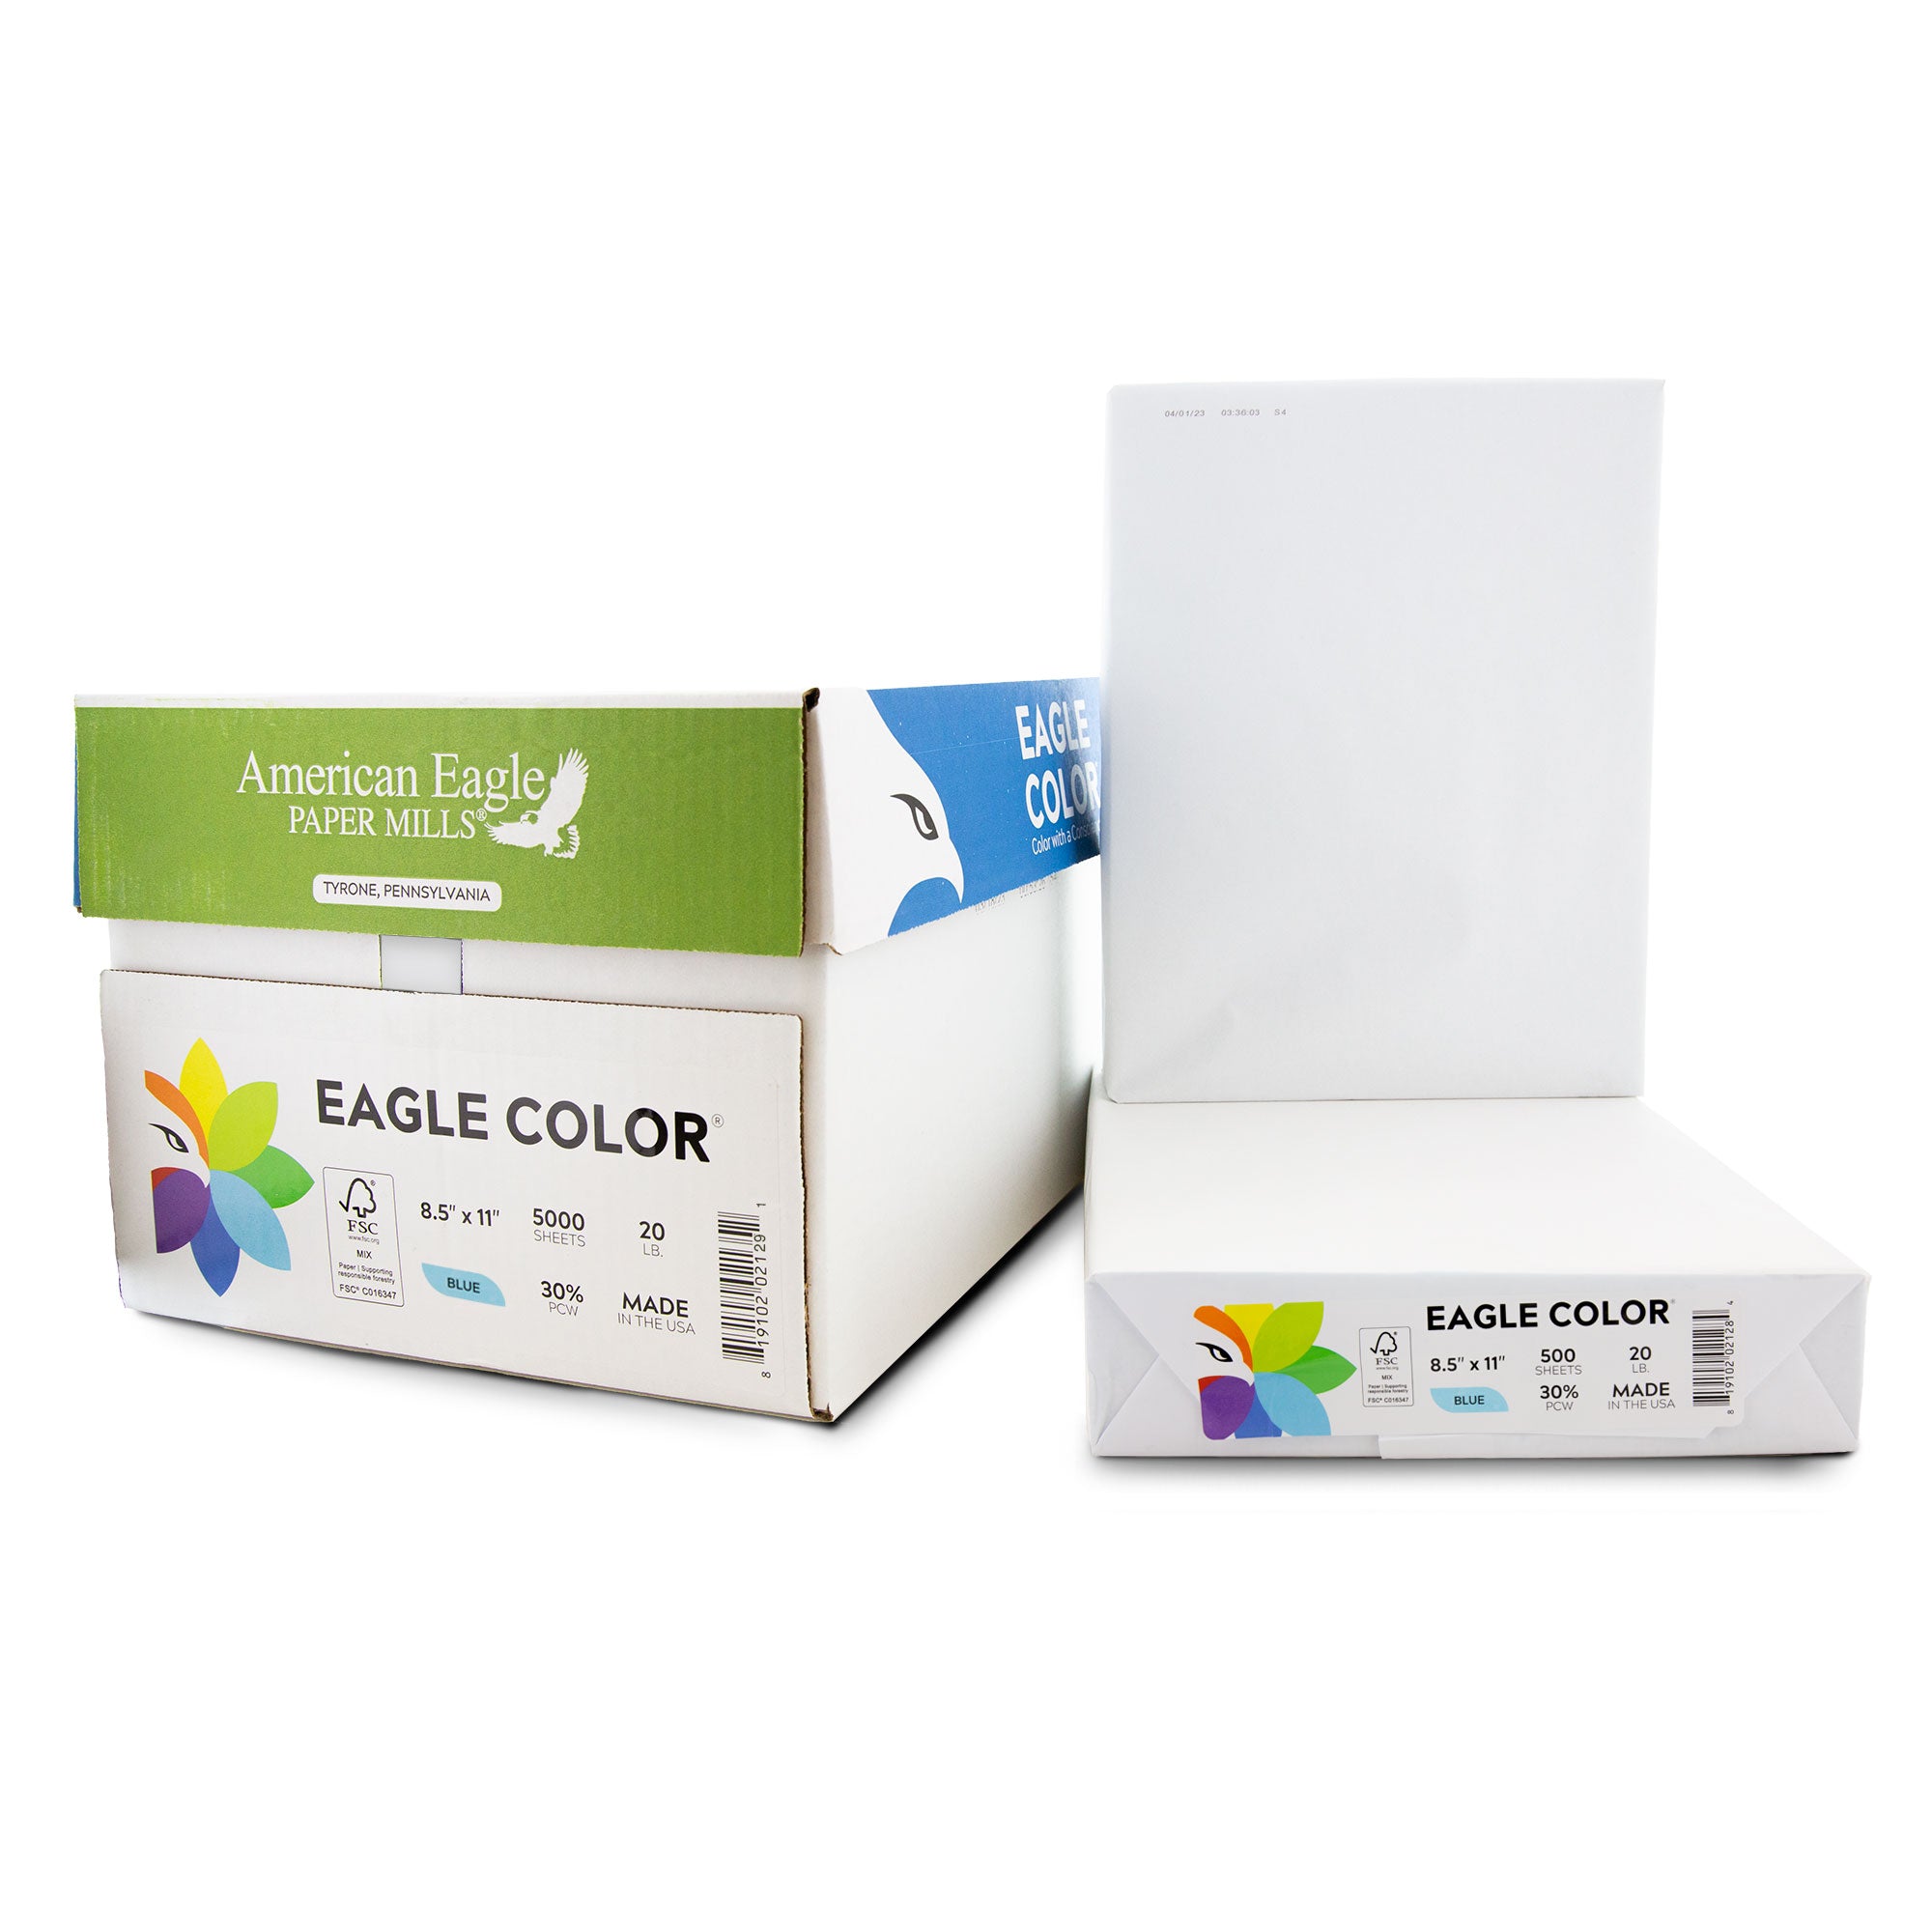 Eagle Color (30% PCW) 8.5 x 11 Blue Colored Copy Paper (500 Sheets/Ream) 10 Reams (Local Pick Up Only)